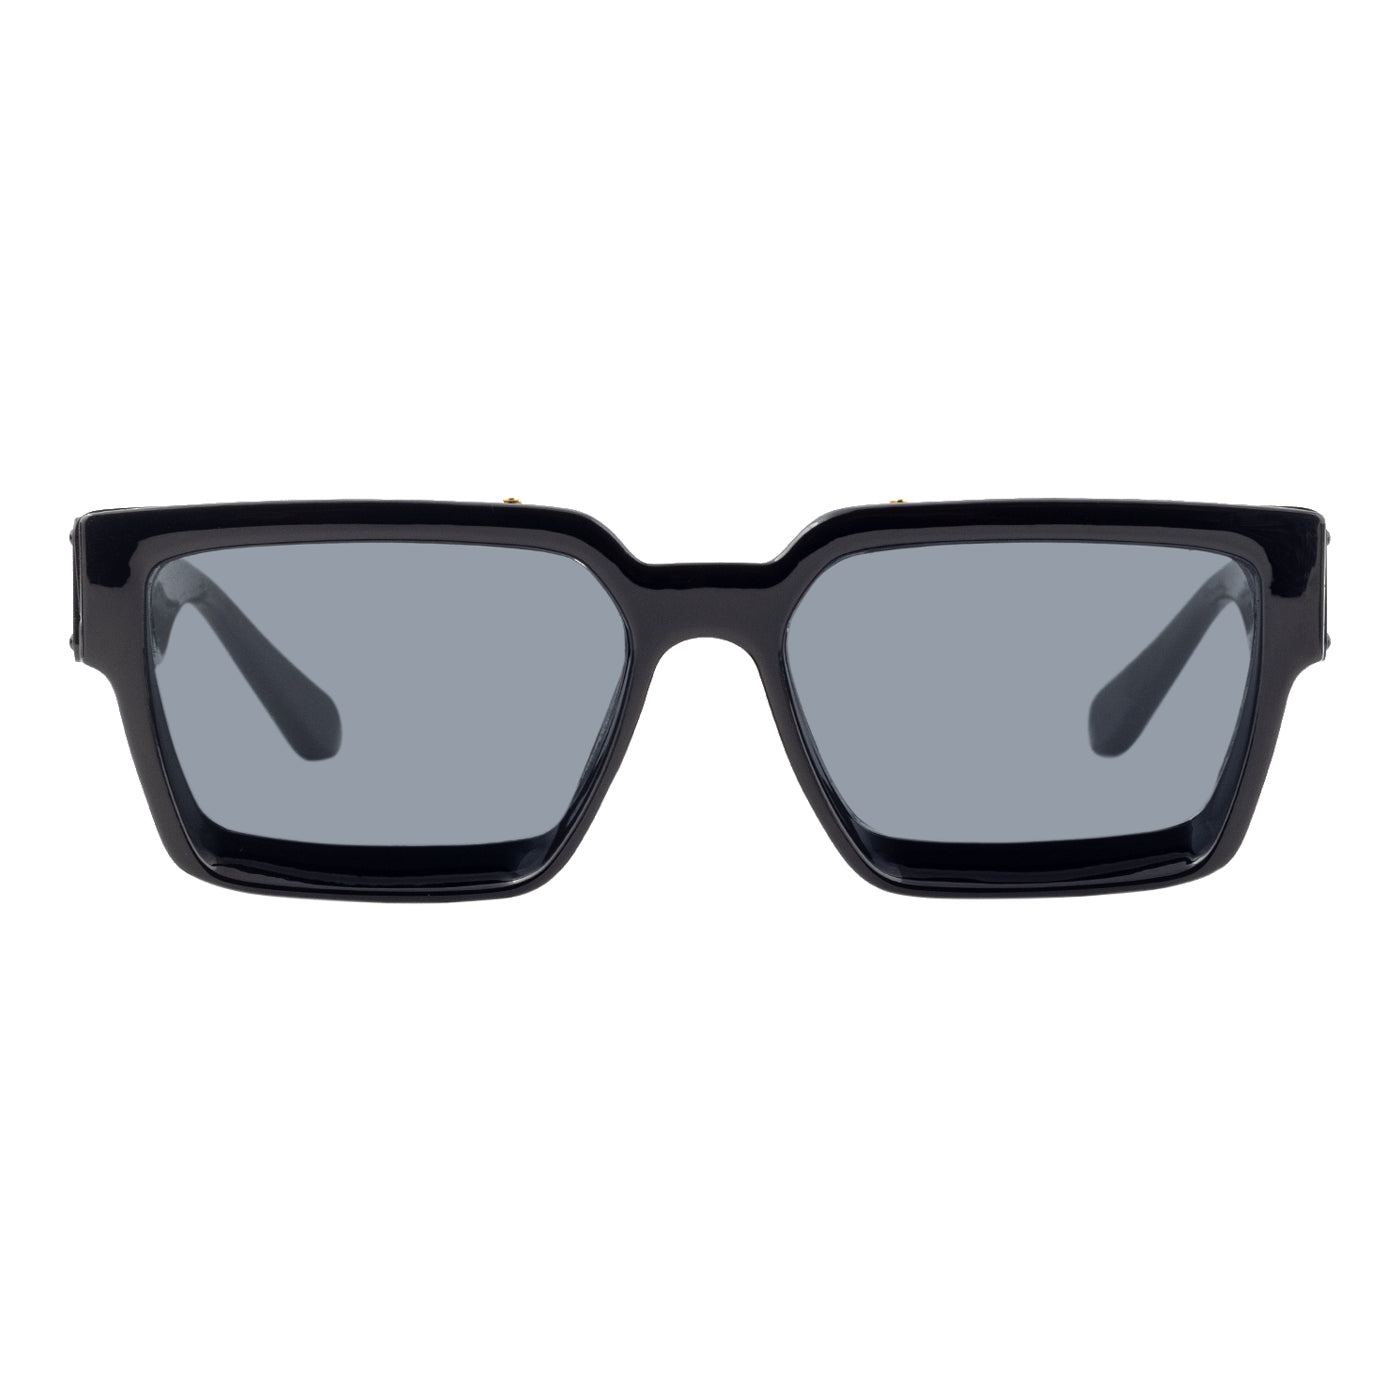 Lucca Sunglass (UV 400 Protection)